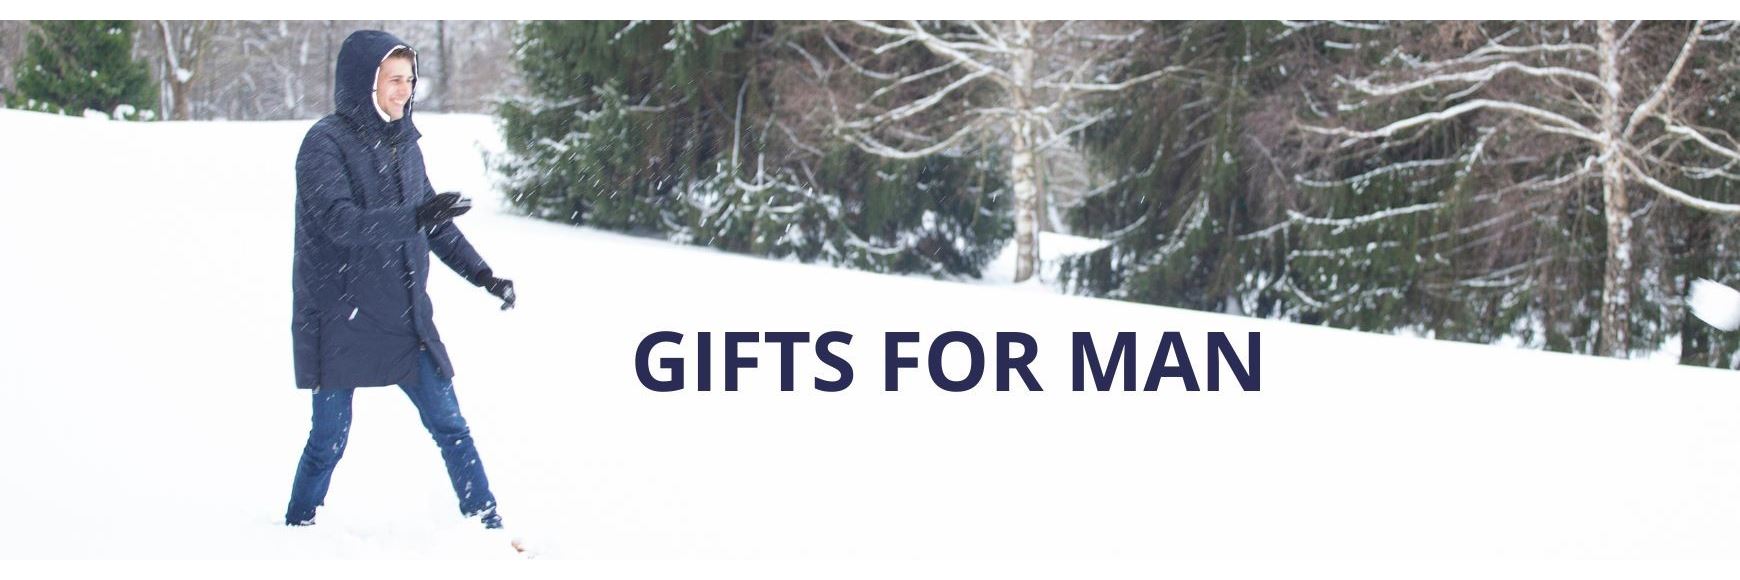 GIFTS FOR MAN